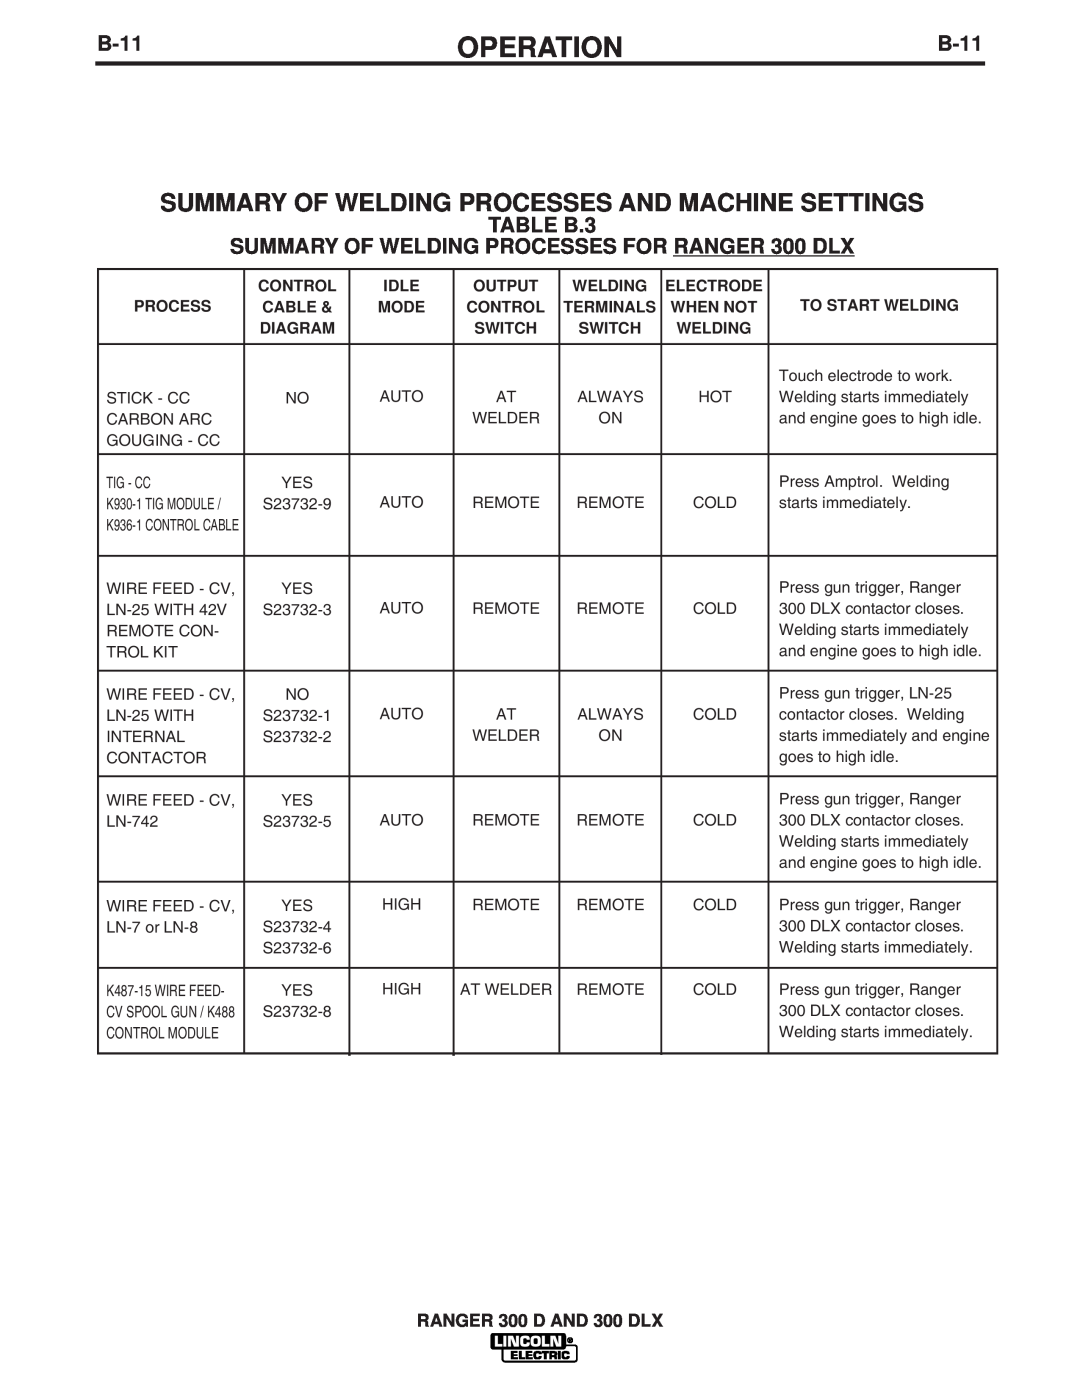 Lincoln Electric 300 D Summary Of Welding Processes And Machine Settings, B-11, TABLE B.3, Operation, Control, Idle, Cable 